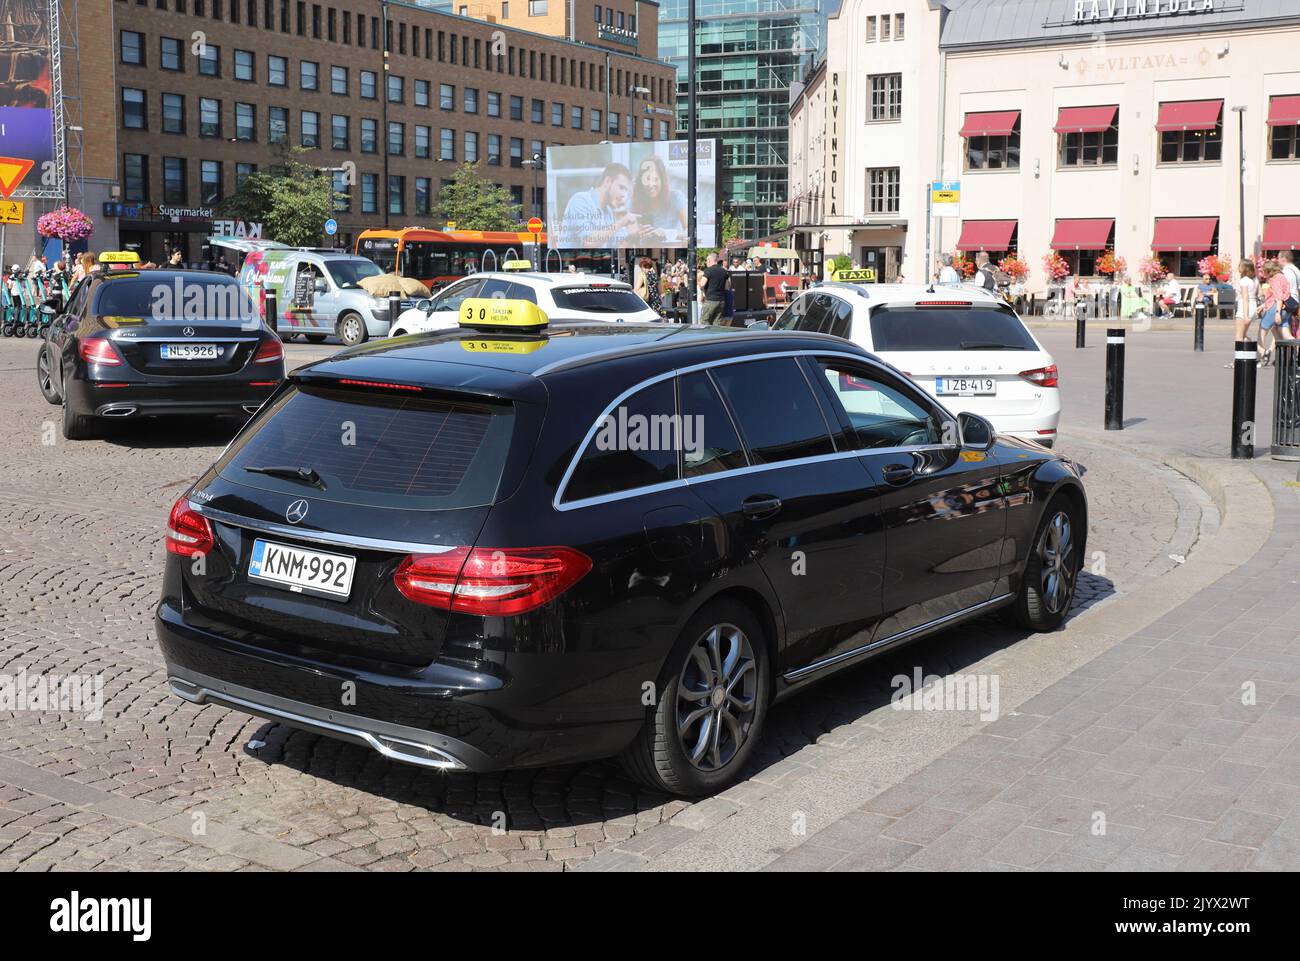 Helsinki, Finland - August 20, 2022: Taxis at the taxi rank outside the Helsinki Central railroad station. Stock Photo